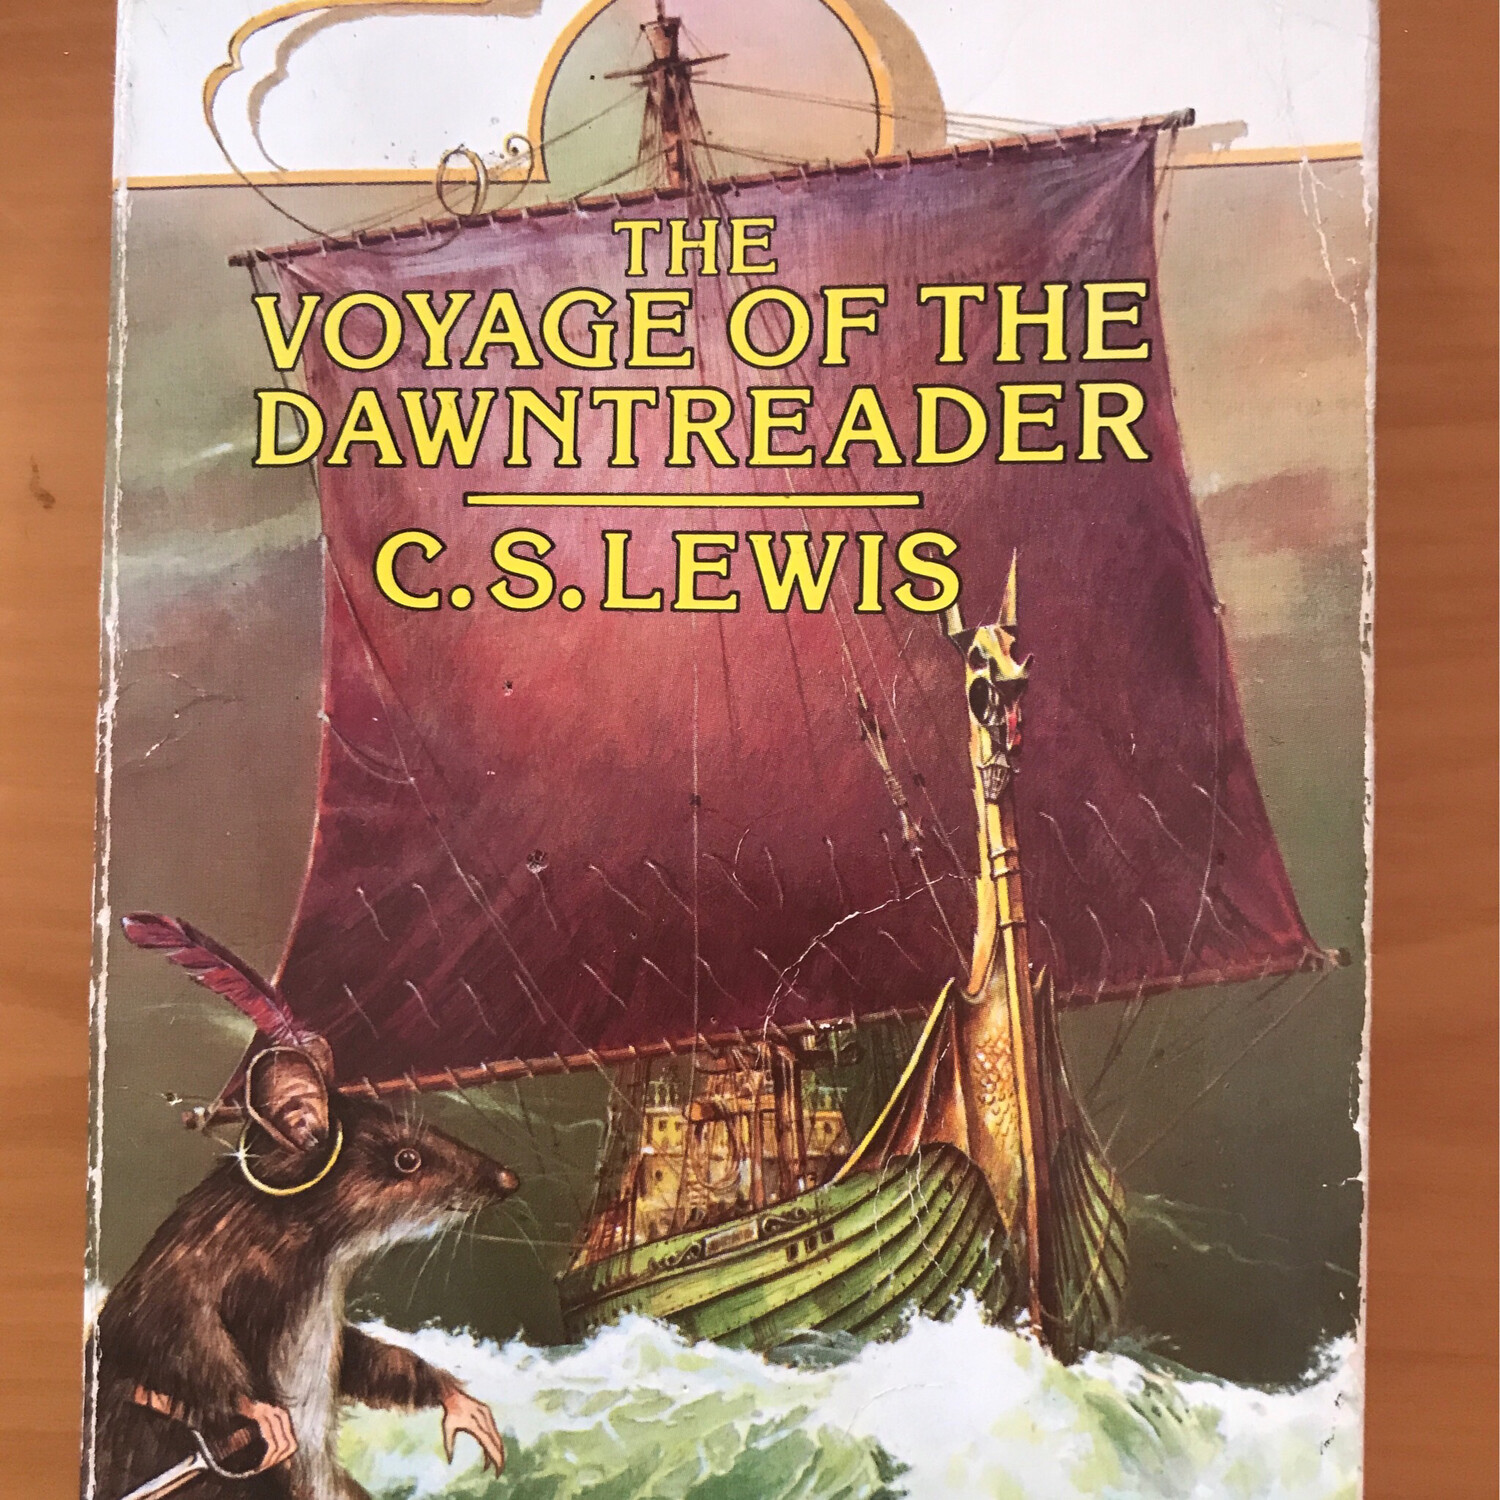 The Voyage Of The Dawntreader, C. S. Lewis